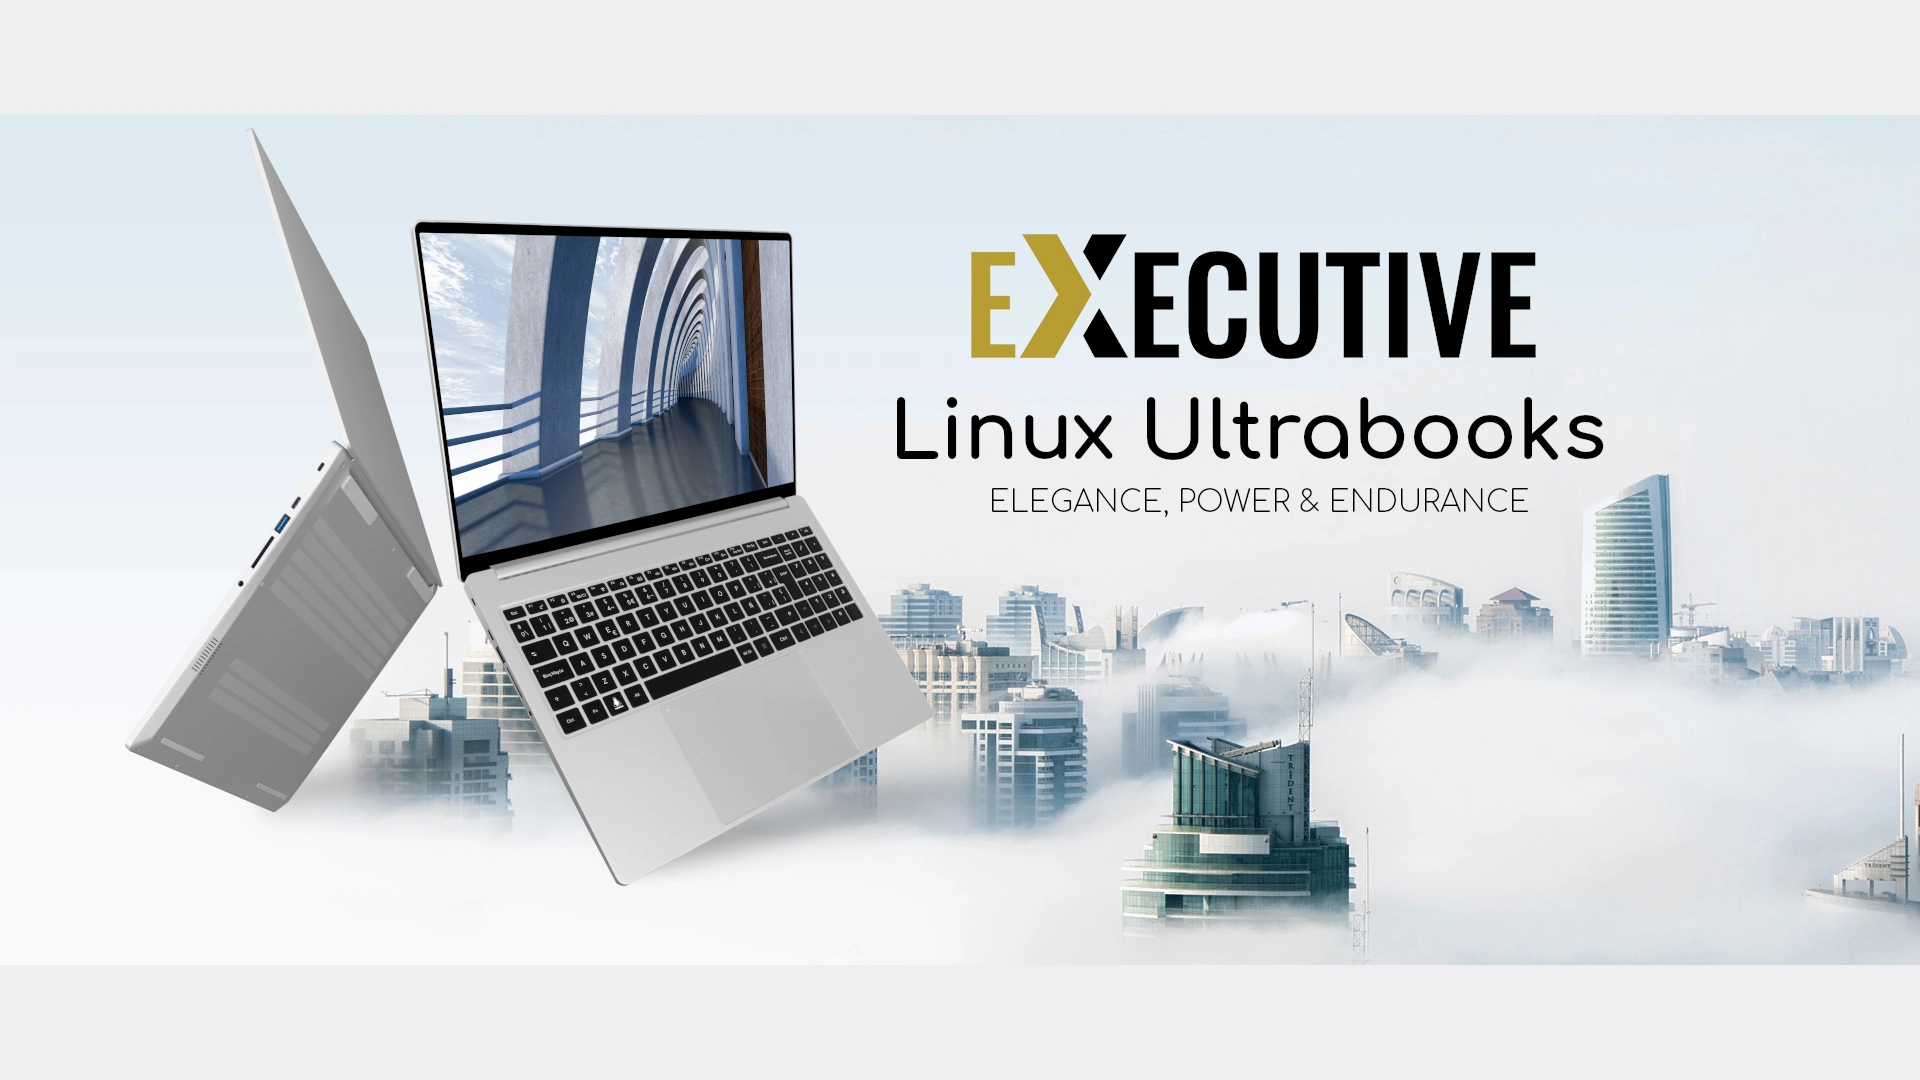 Slimbook Executive Linux Ultrabooks Now Ship with 12th Gen Intel Alder Lake CPUs